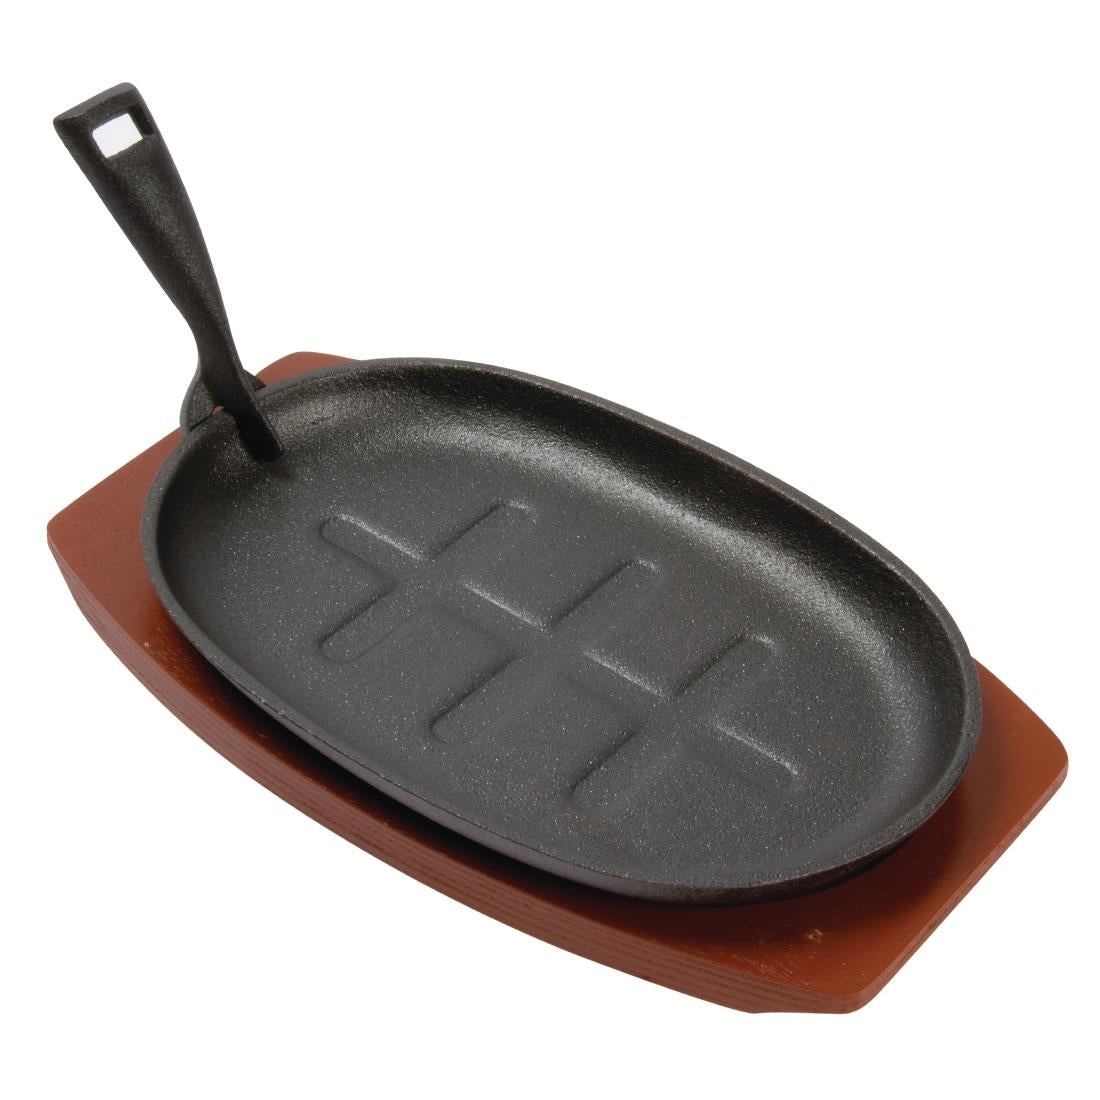 CC310 Olympia Cast Iron Oval Sizzler with Wooden Stand 280mm